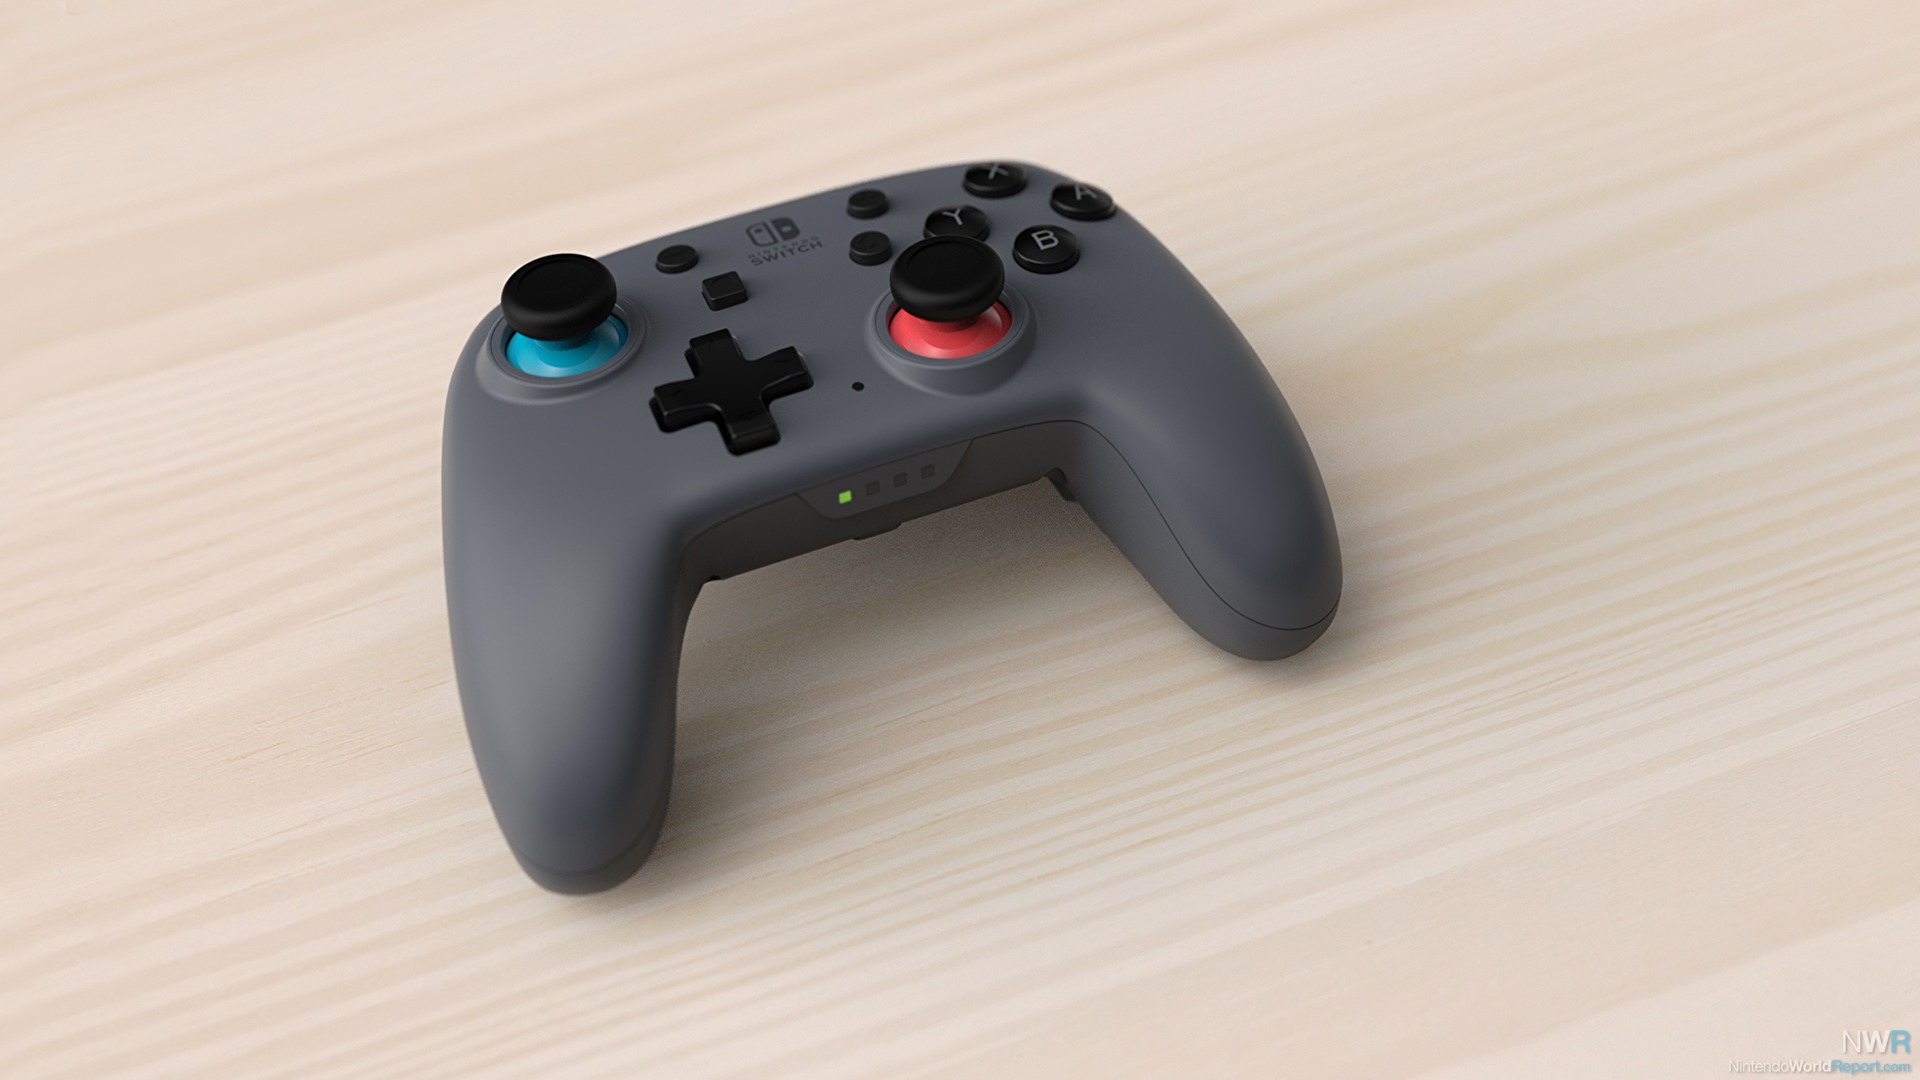 PowerA Launching Small Switch Pro Controller in August - News - Nintendo World Report